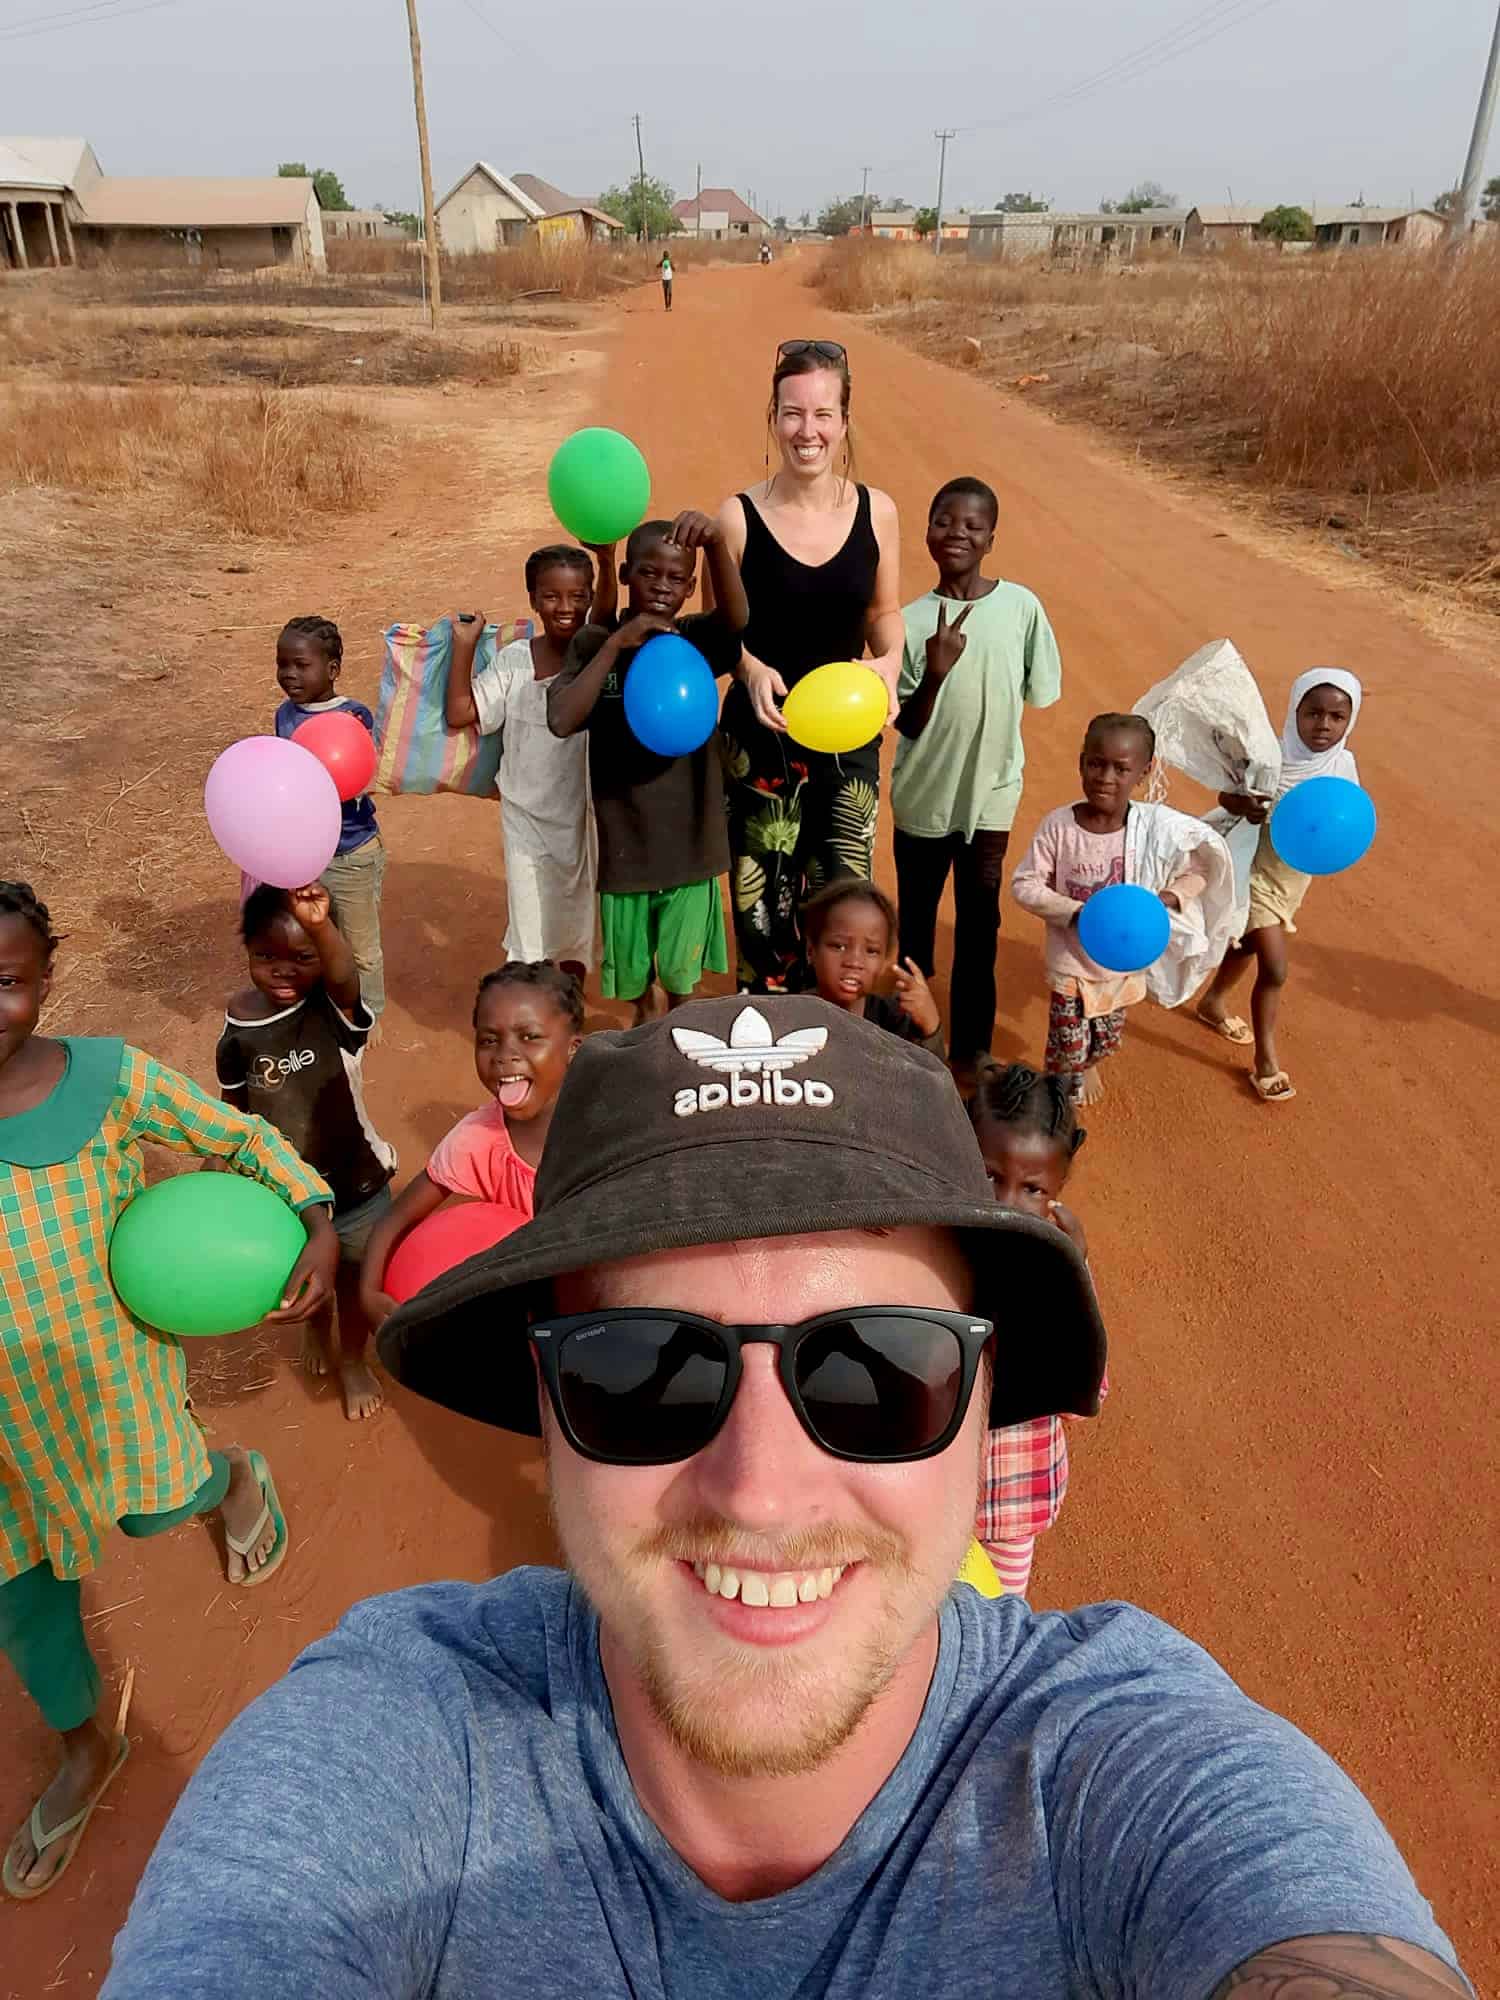 Handing out balloons to children in Tamale, Ghana.